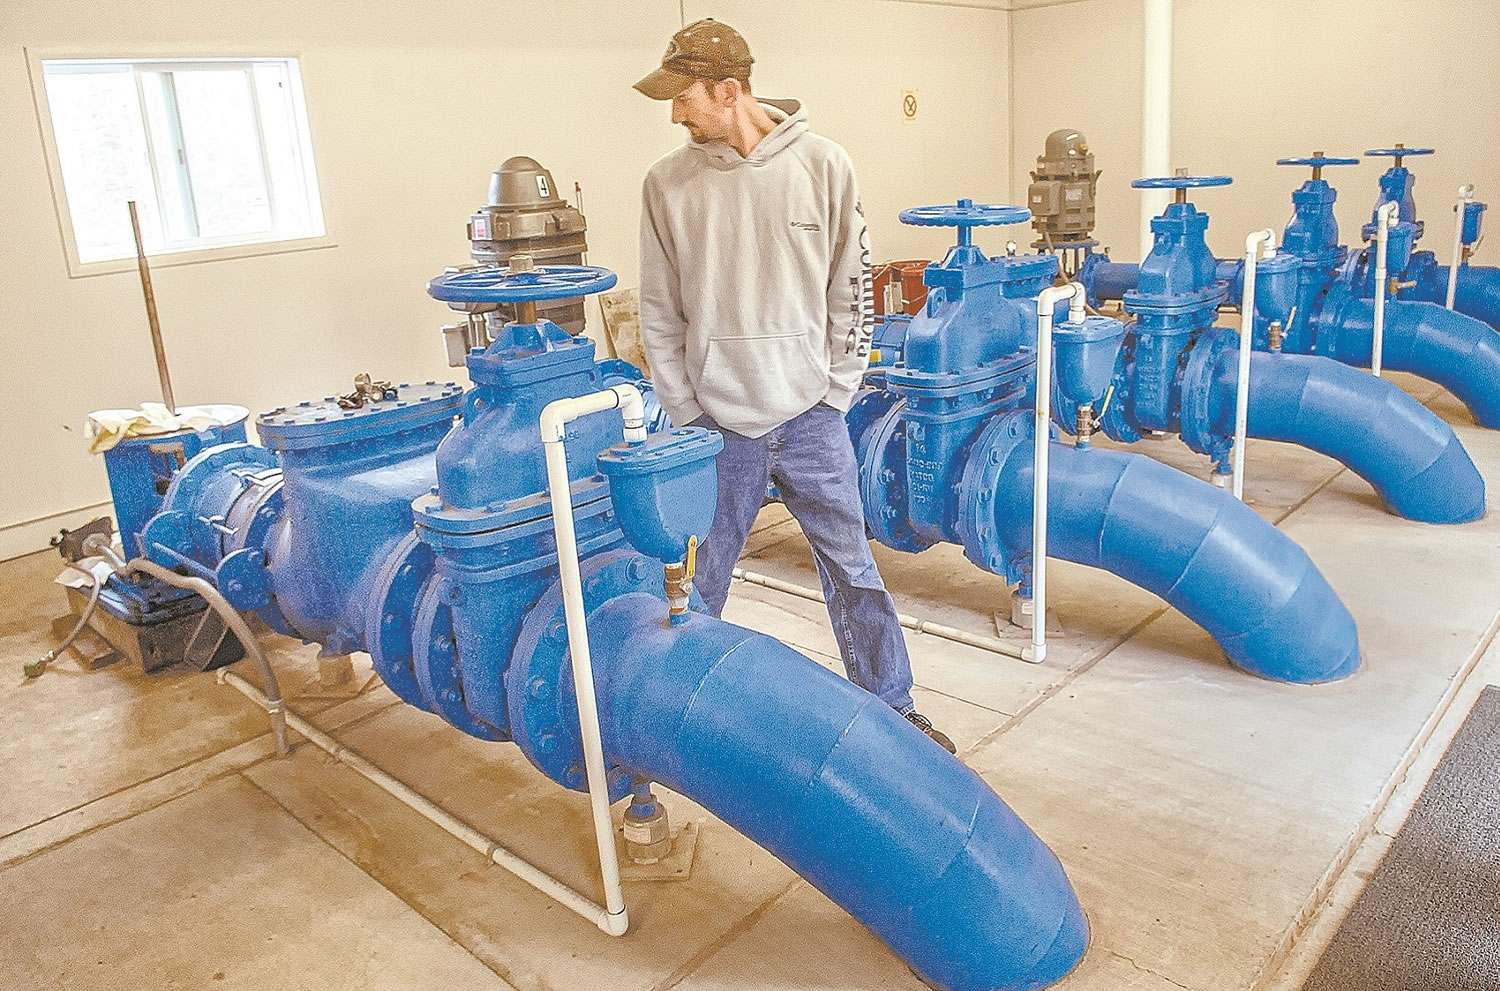 Sam Gibbons, manager of the Kalama Falls Hatchery, walks through the pump room where a problem led to the death of 200,000 fish last week.